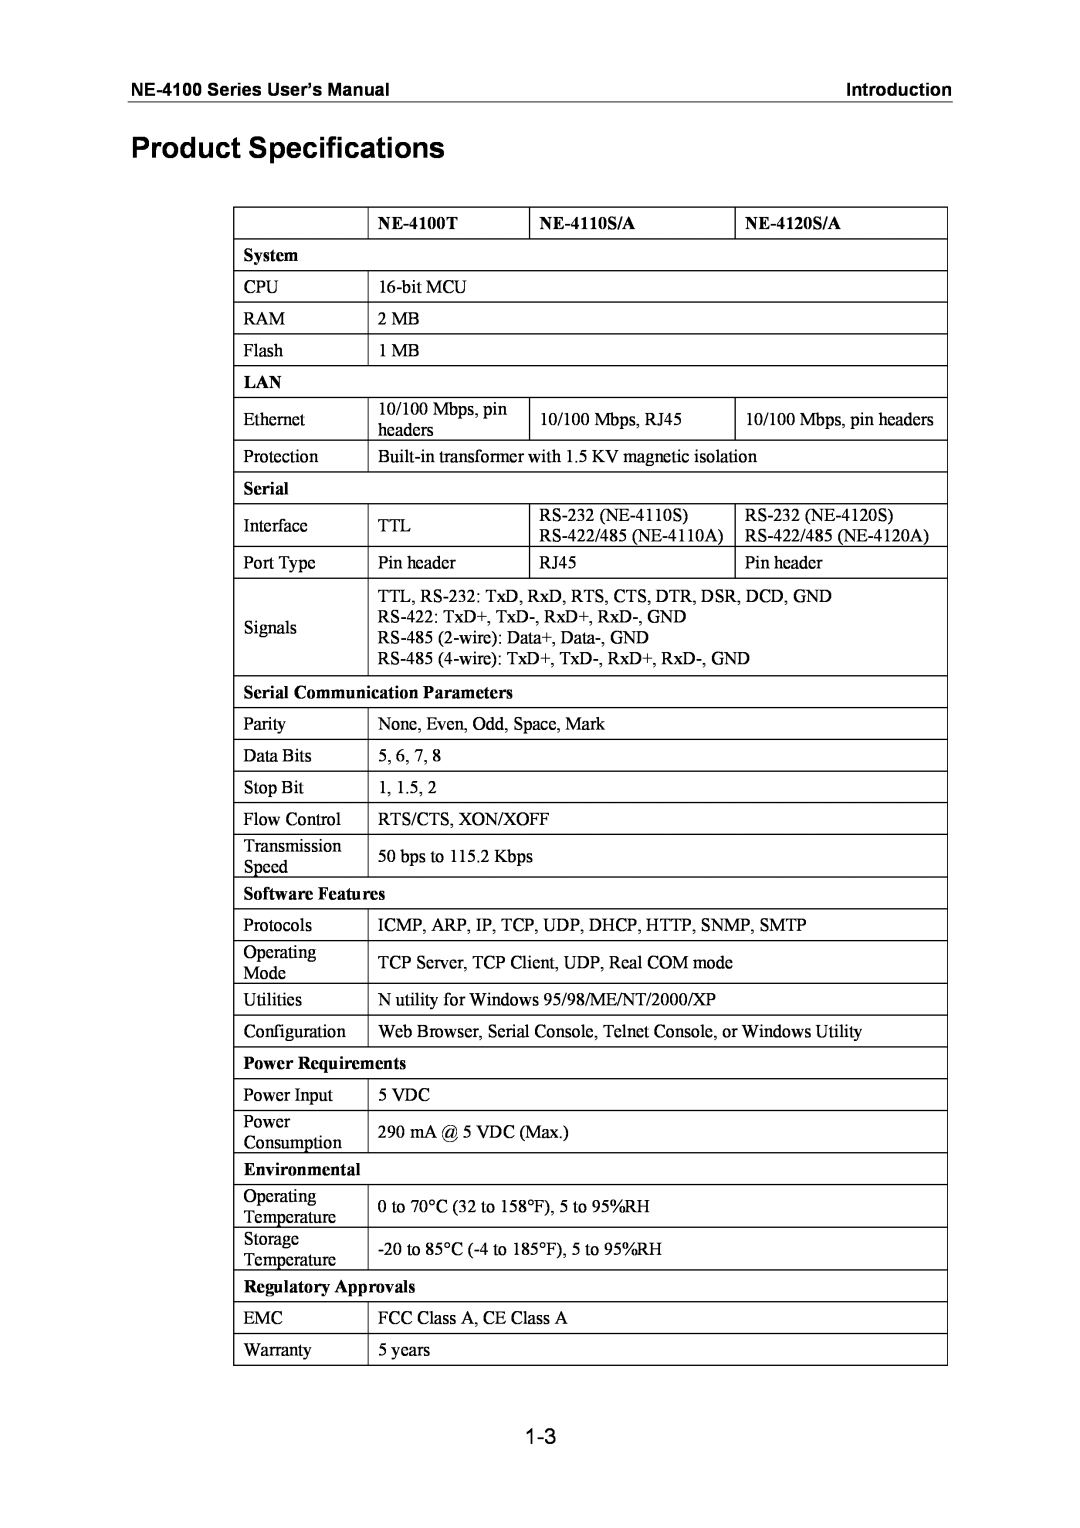 Moxa Technologies user manual Product Specifications, NE-4100 Series User’s Manual, Introduction 